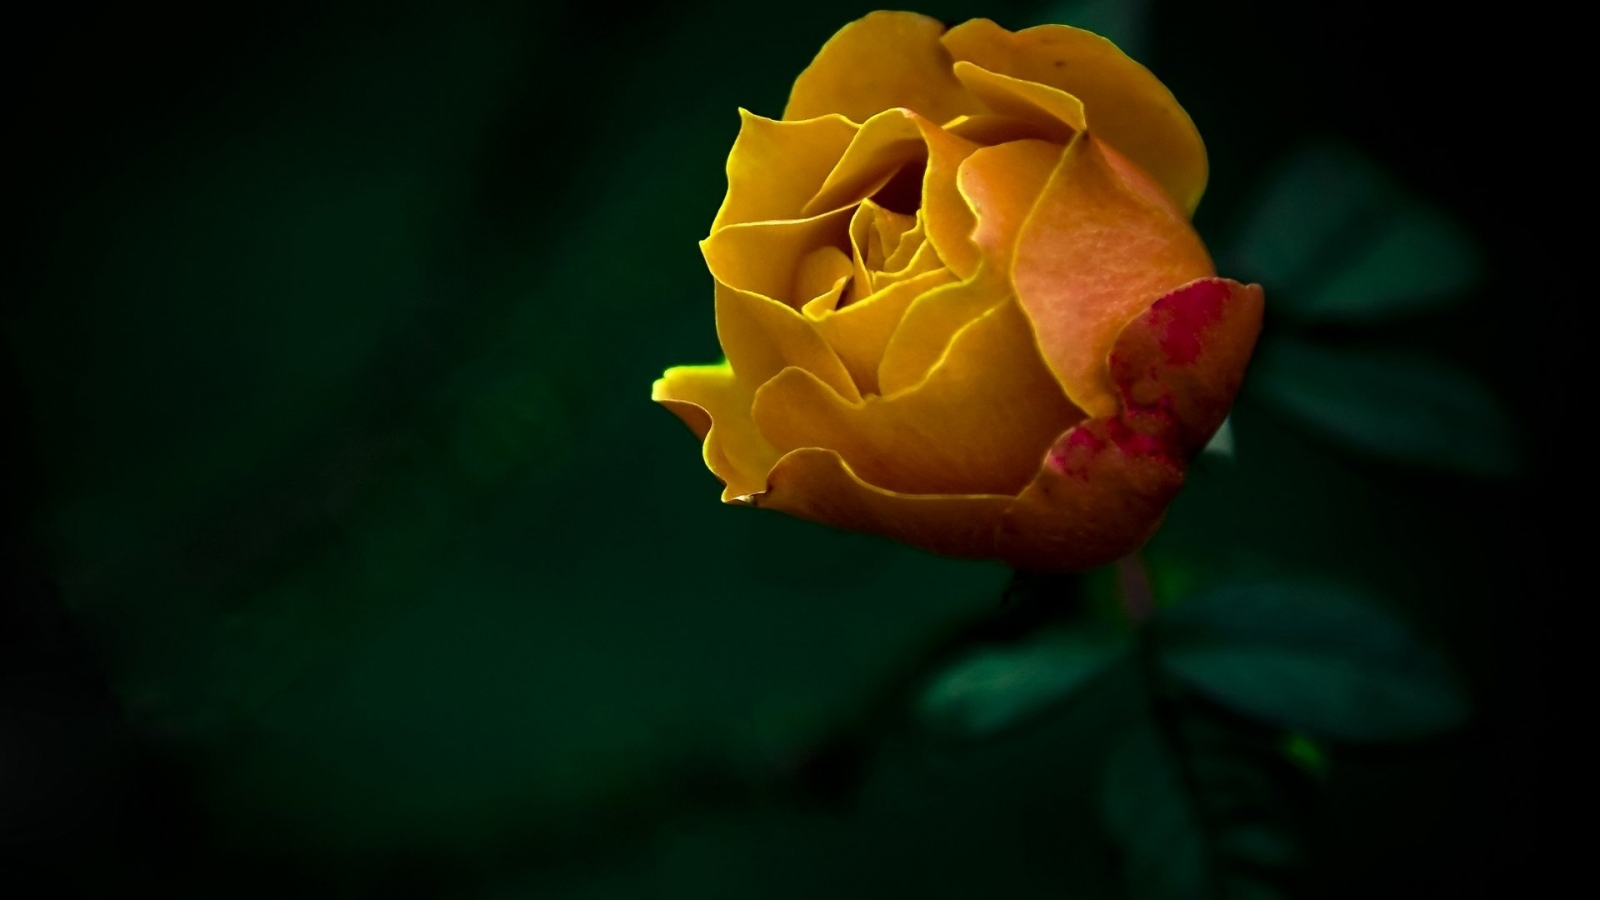 The last Rose for 1600 x 900 HDTV resolution